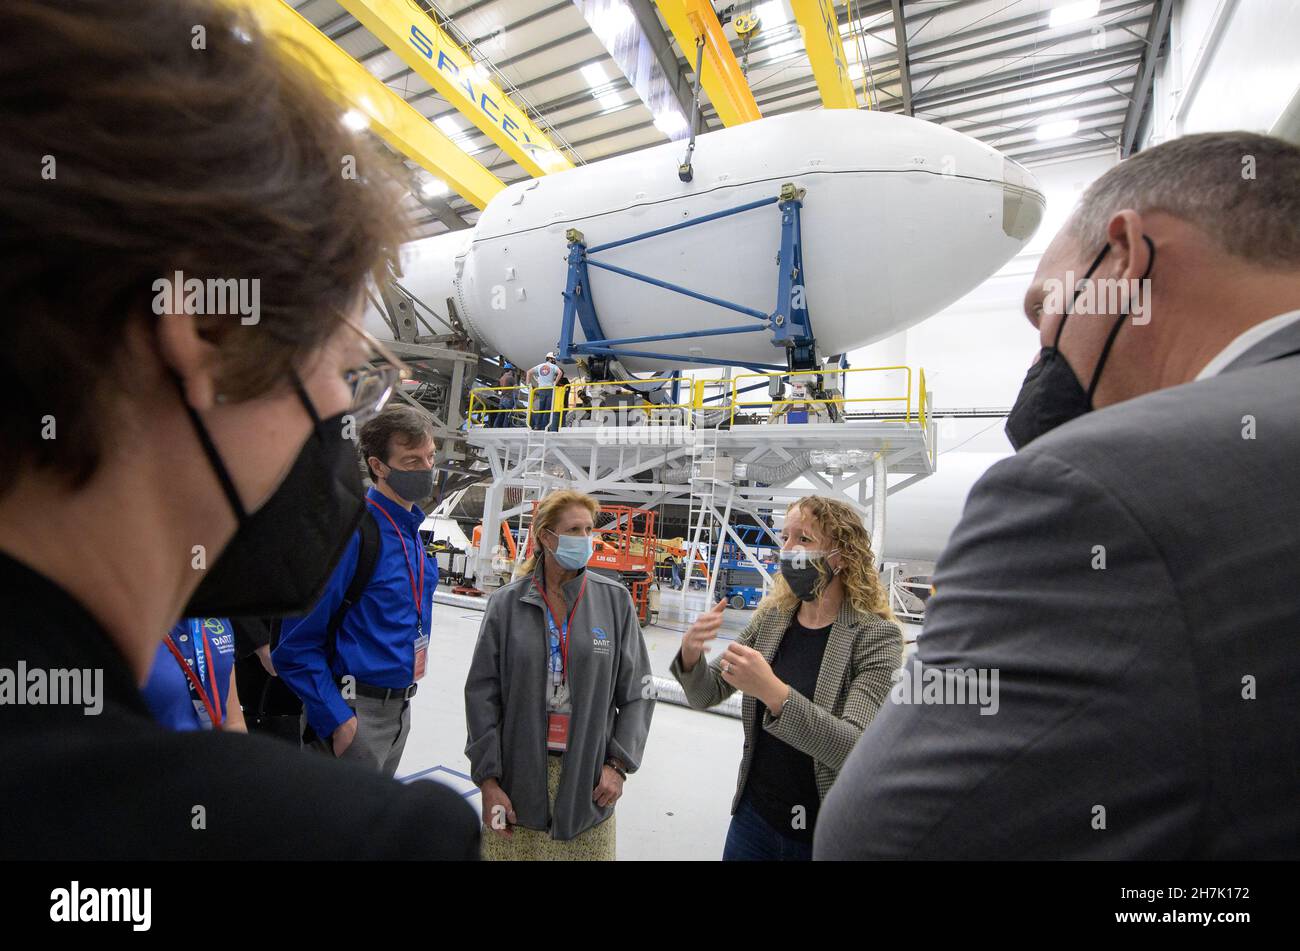 NASA Associate Administrator for the Science Mission Directorate Thomas Zurbuchen, right, and other NASA leadership listen as Julianna Scheiman, director for civil satellite missions, SpaceX, center, gives a tour of the hanger where the Falcon 9 rocket and DART spacecraft are being readied for launch, Monday, Nov. 22, 2021, at Vandenberg Space Force Base in California. DART is the world's first full-scale planetary defense test, demonstrating one method of asteroid deflection technology. The mission was built and is managed by the Johns Hopkins APL for NASA's Planetary Defense Coordination Off Stock Photo